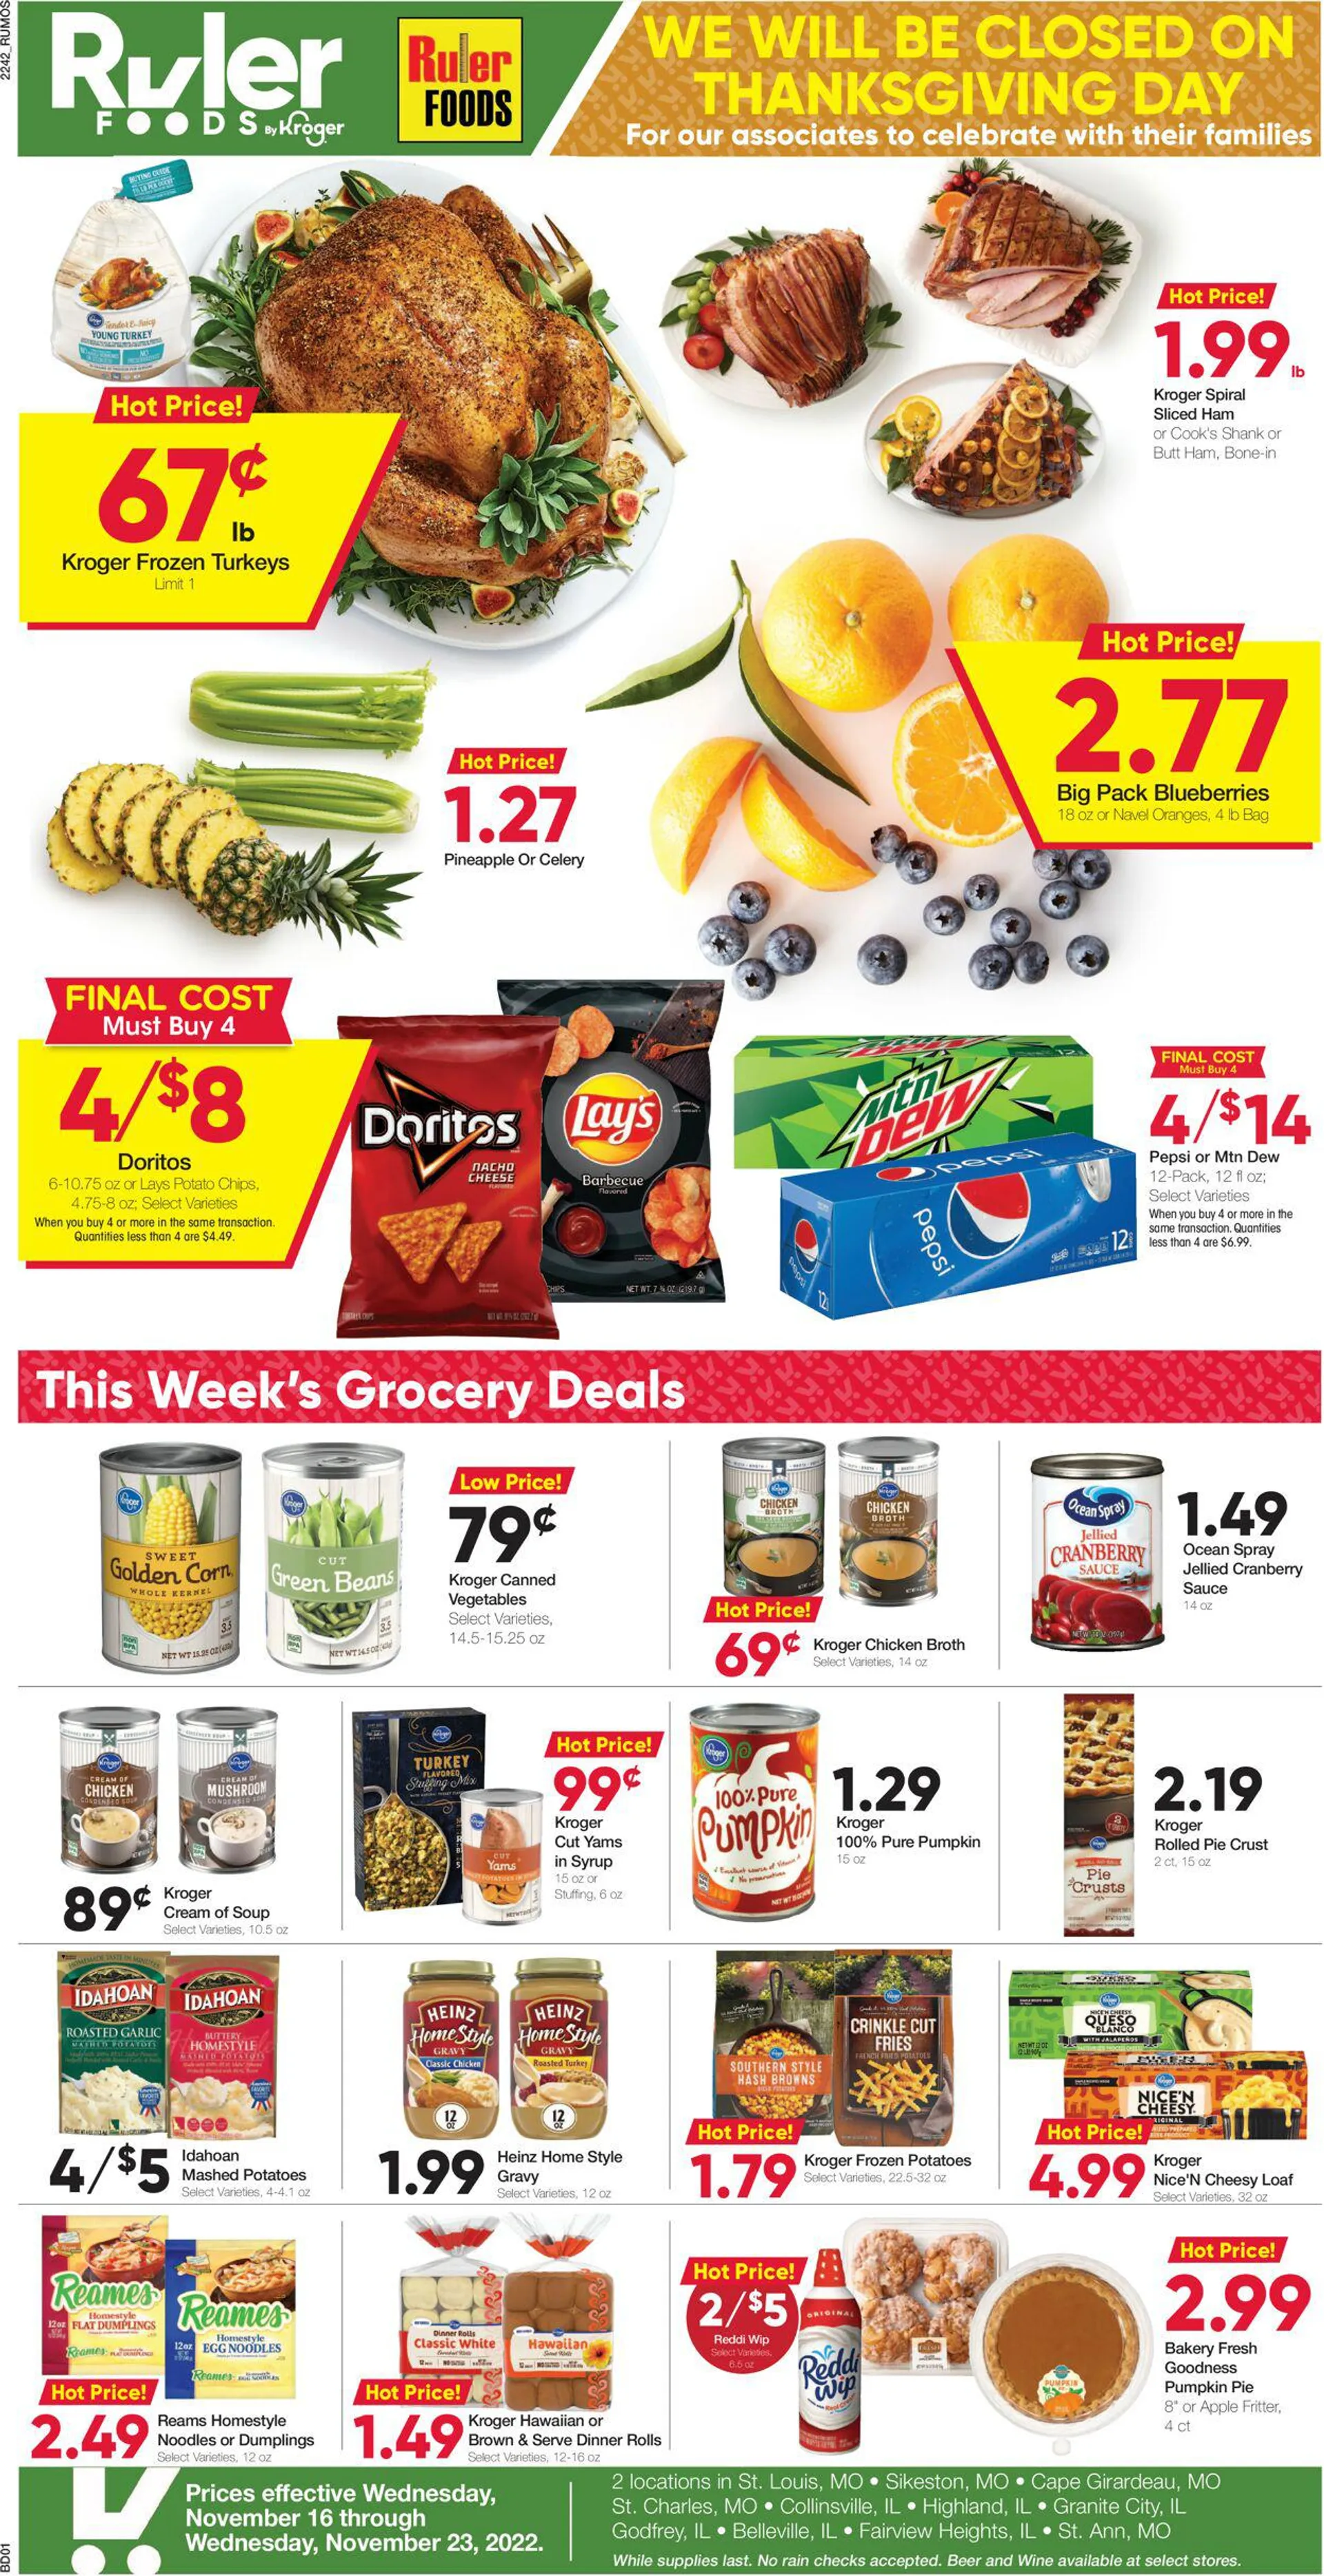 Ruler Foods Current weekly ad - 1